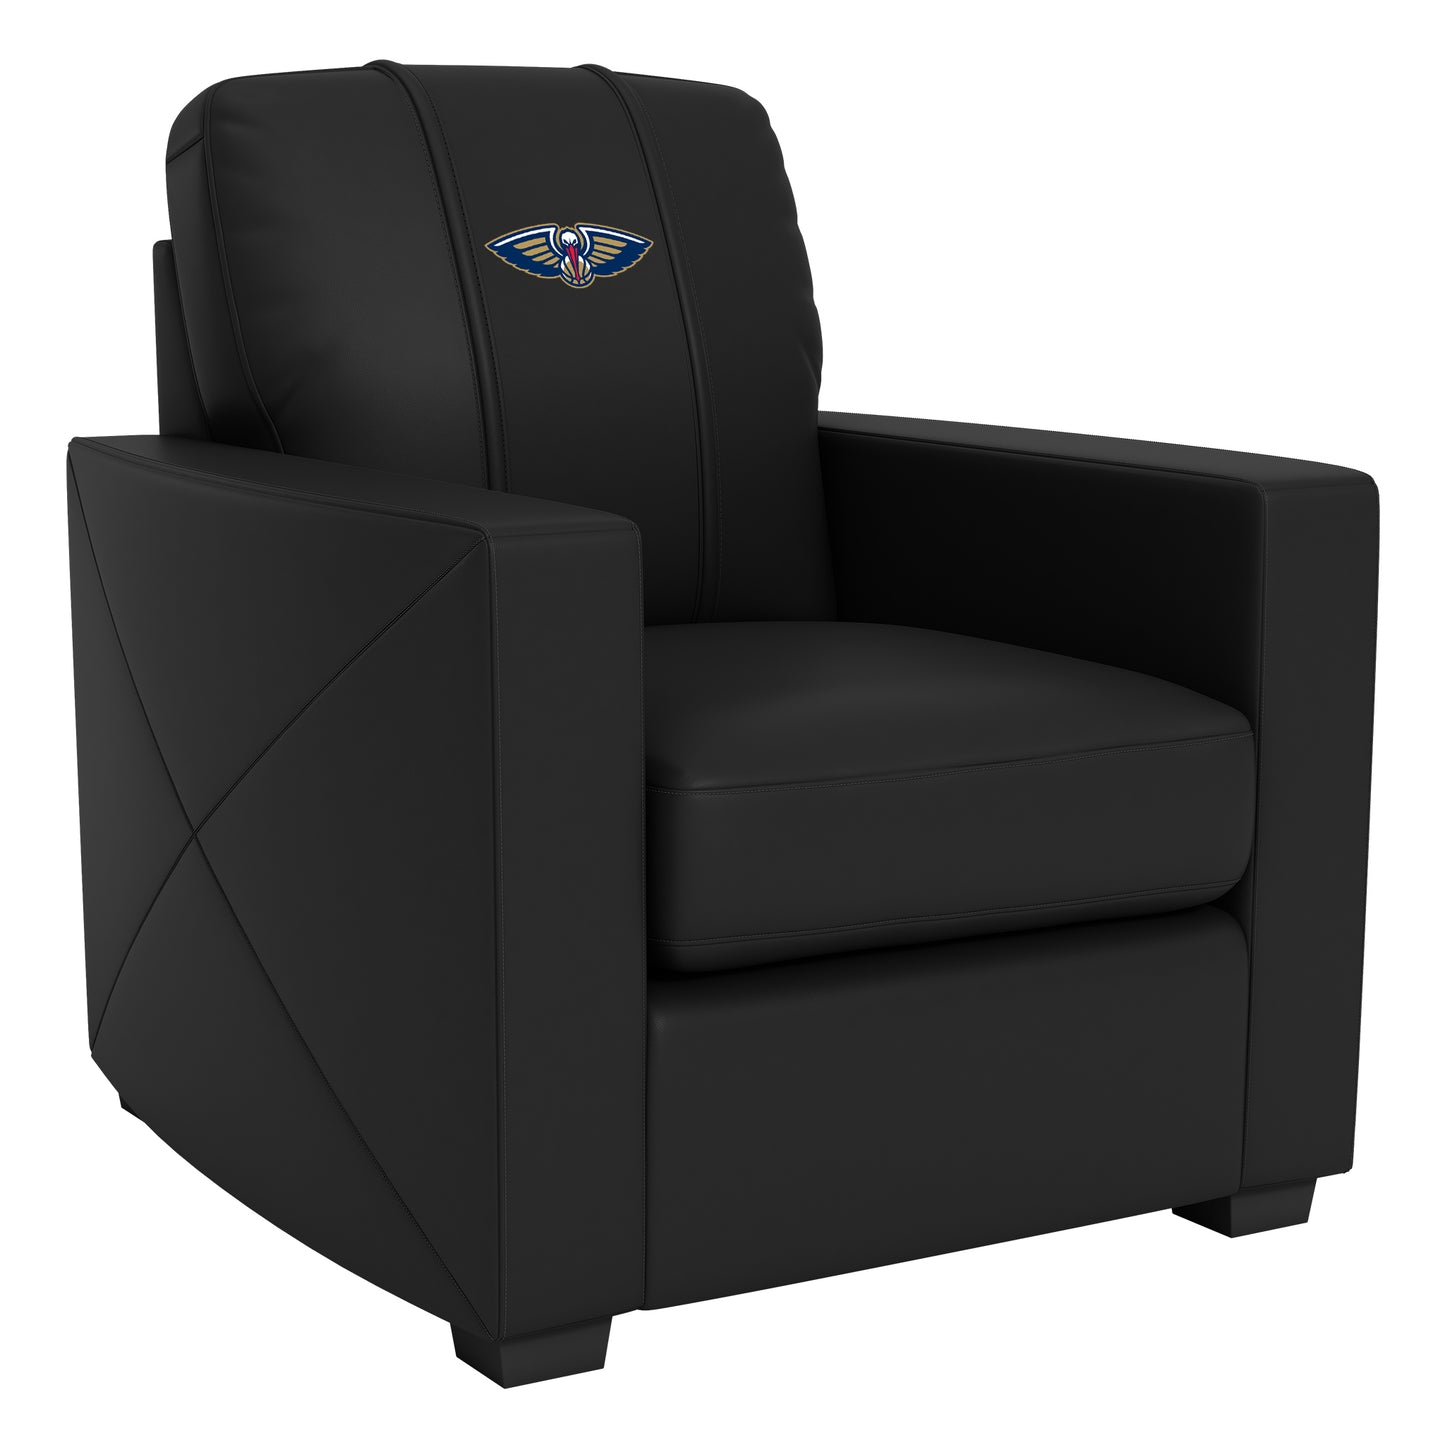 Silver Club Chair with New Orleans Pelicans Primary Logo